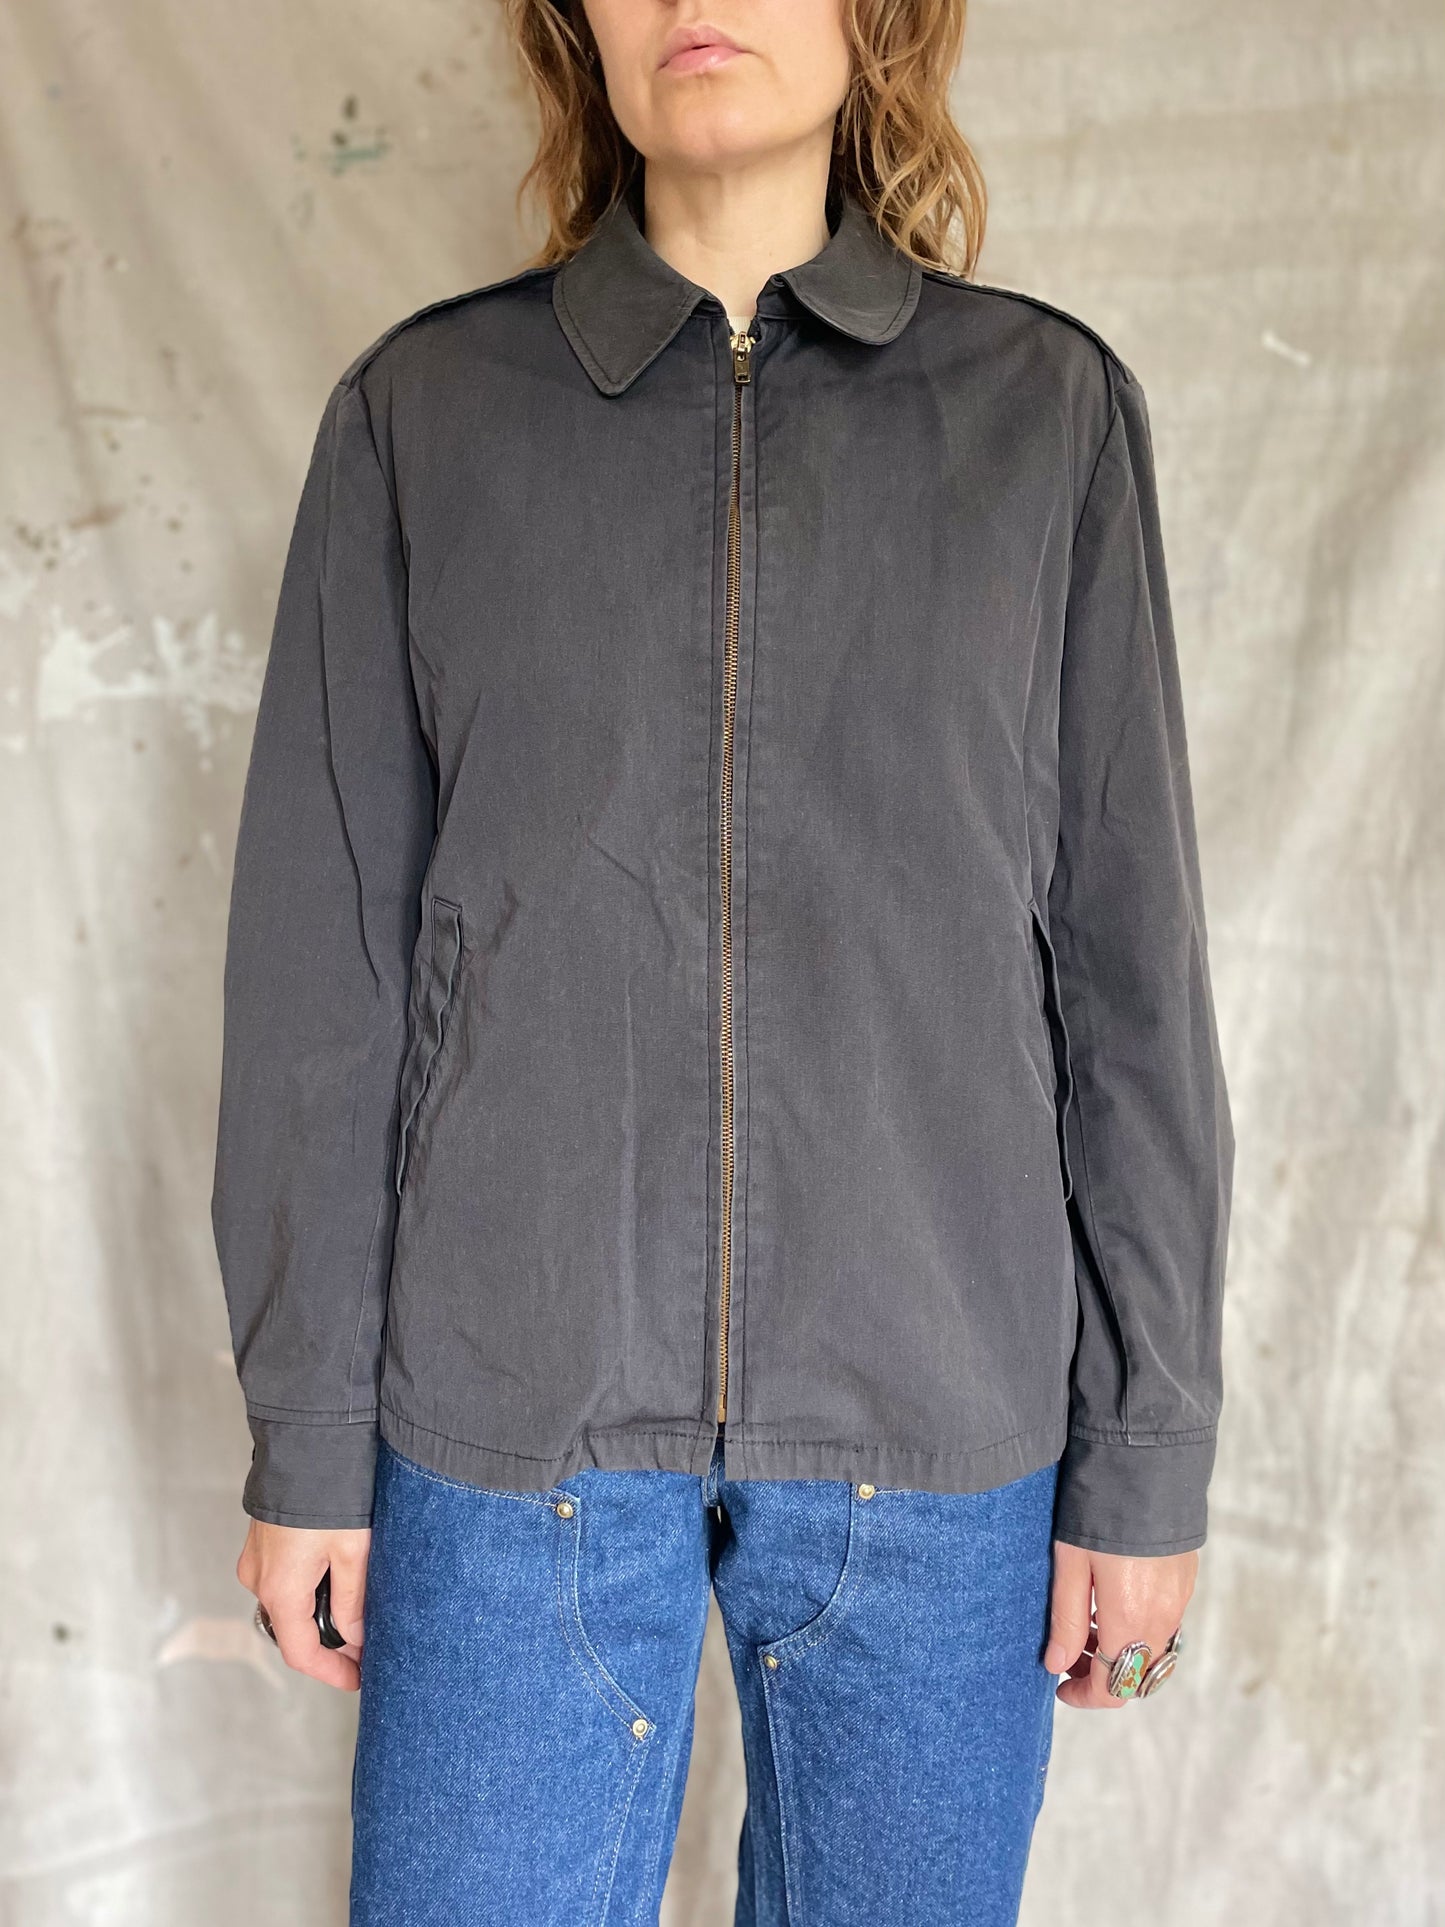 80s Black Water Repellent Lined Army Jacket